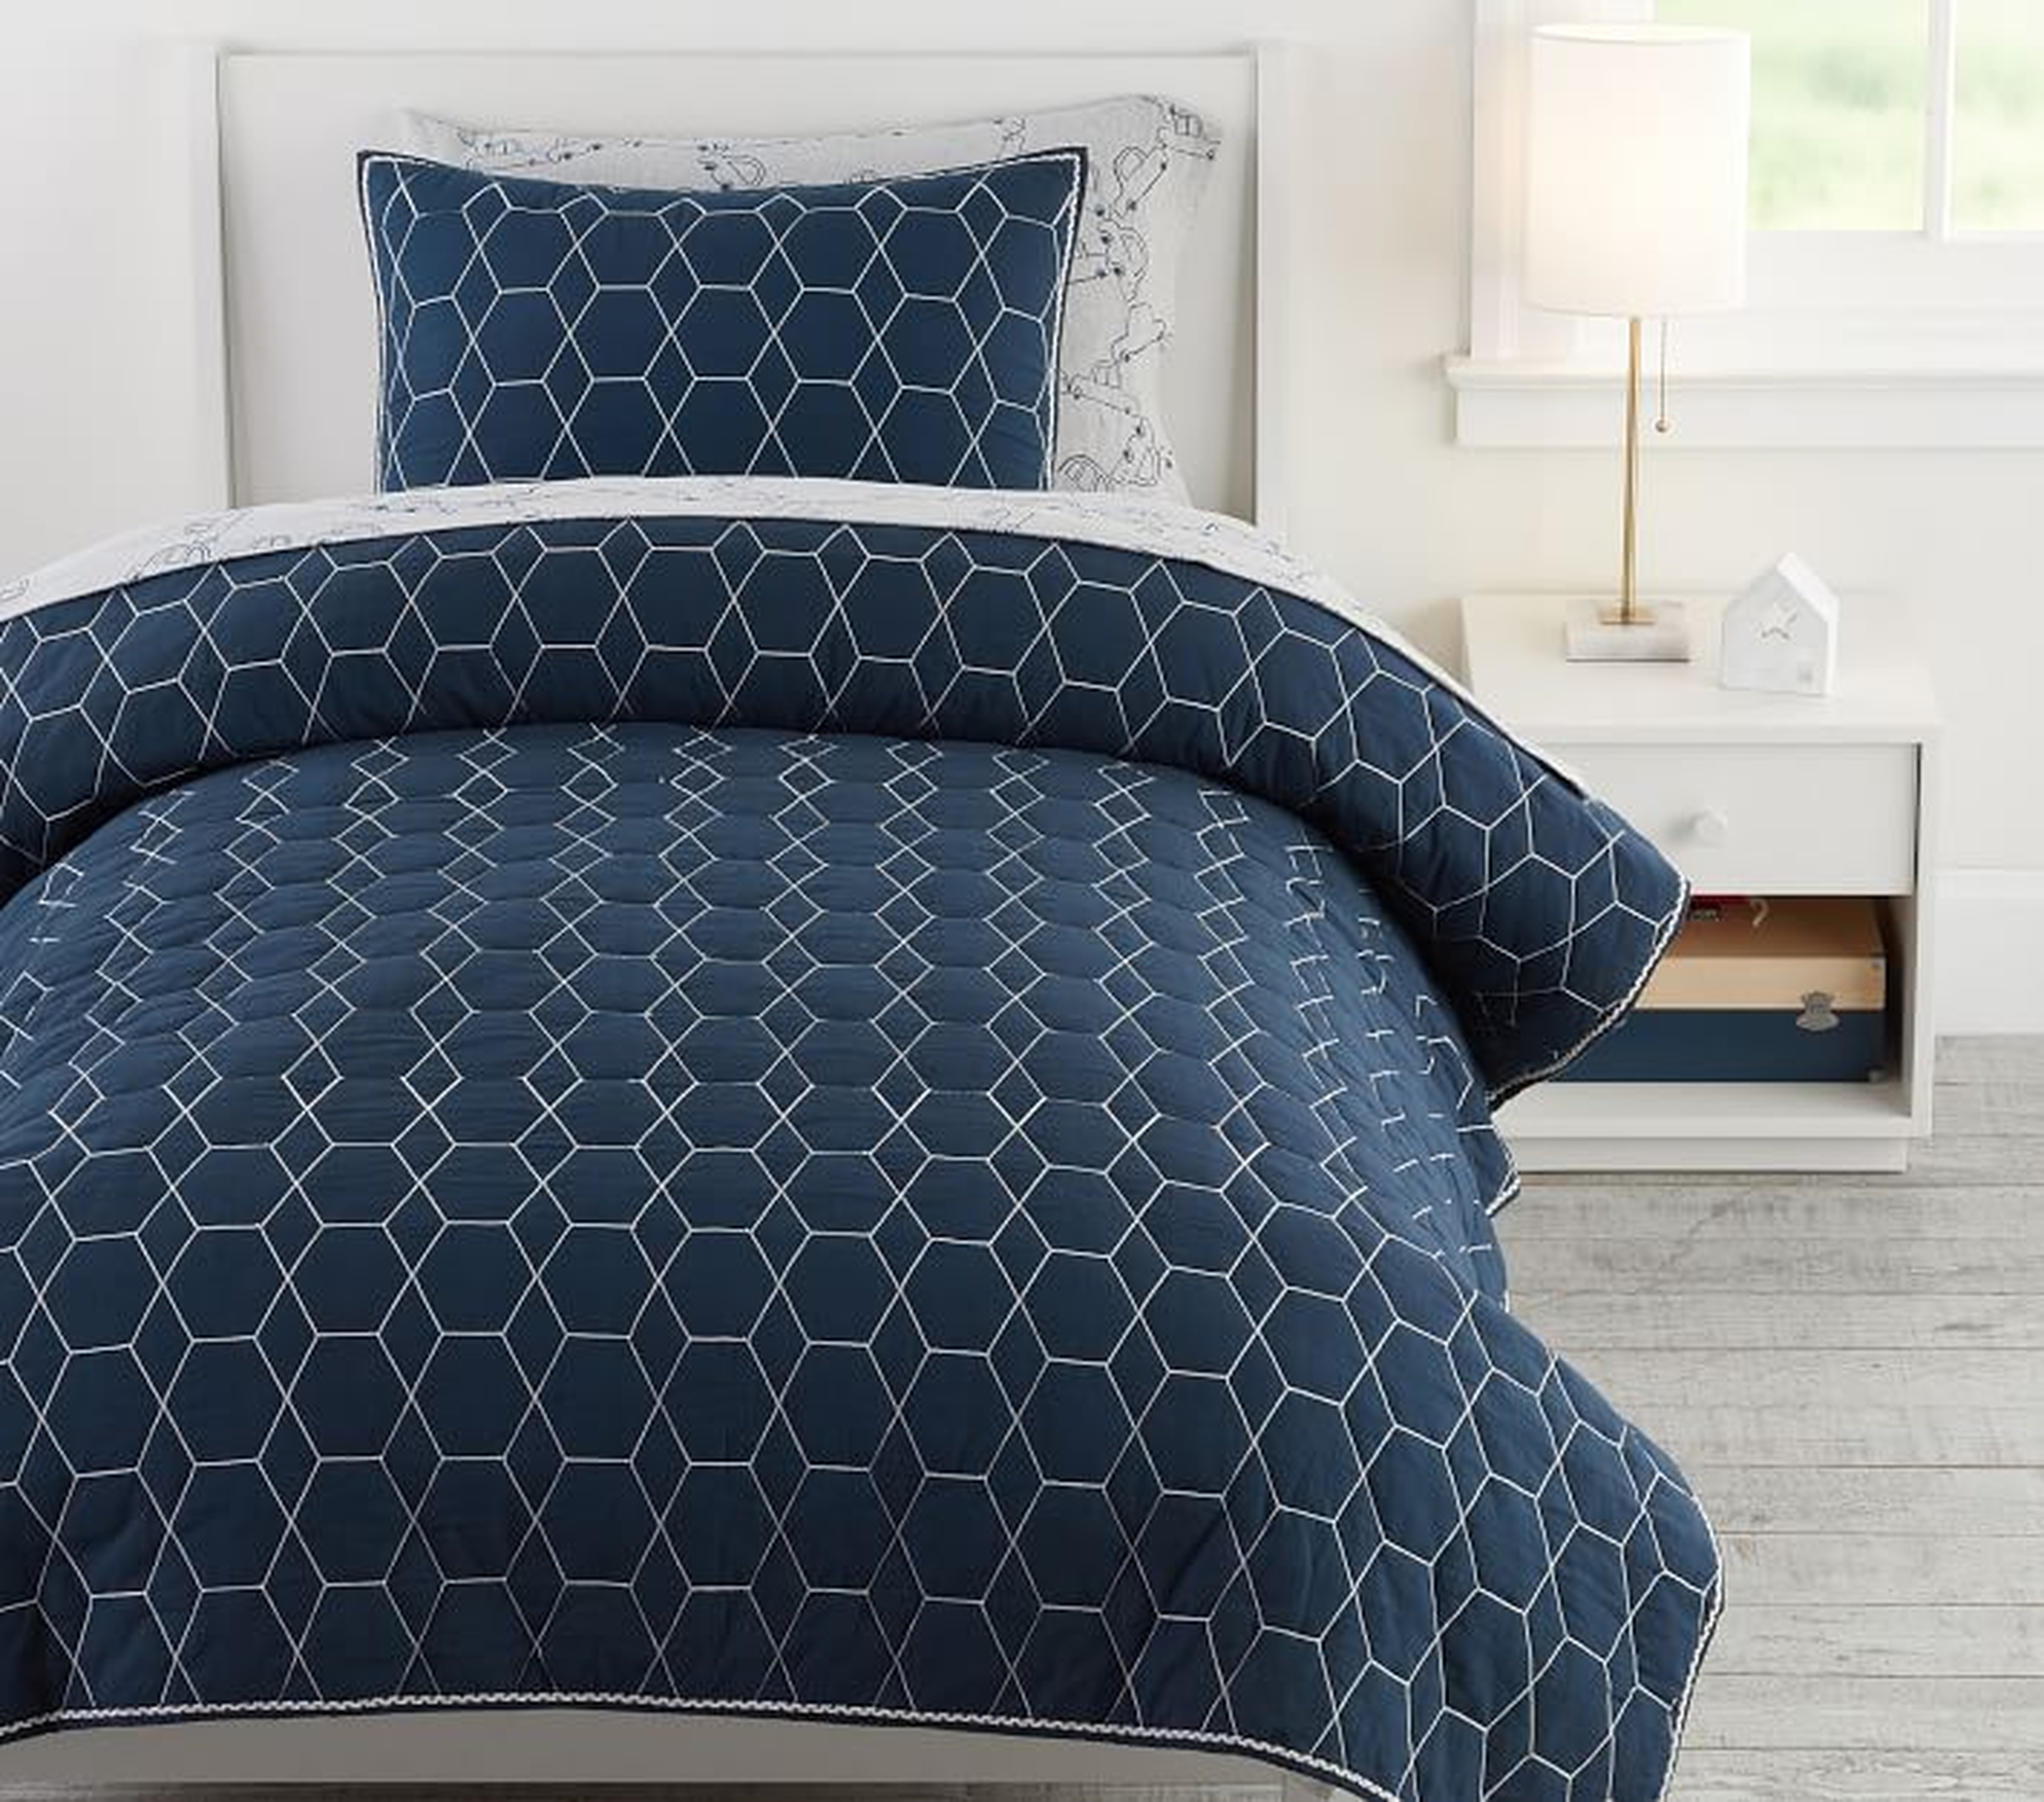 Pw Honeycomb Quilt, Twin, Nightshade, - Pottery Barn Kids